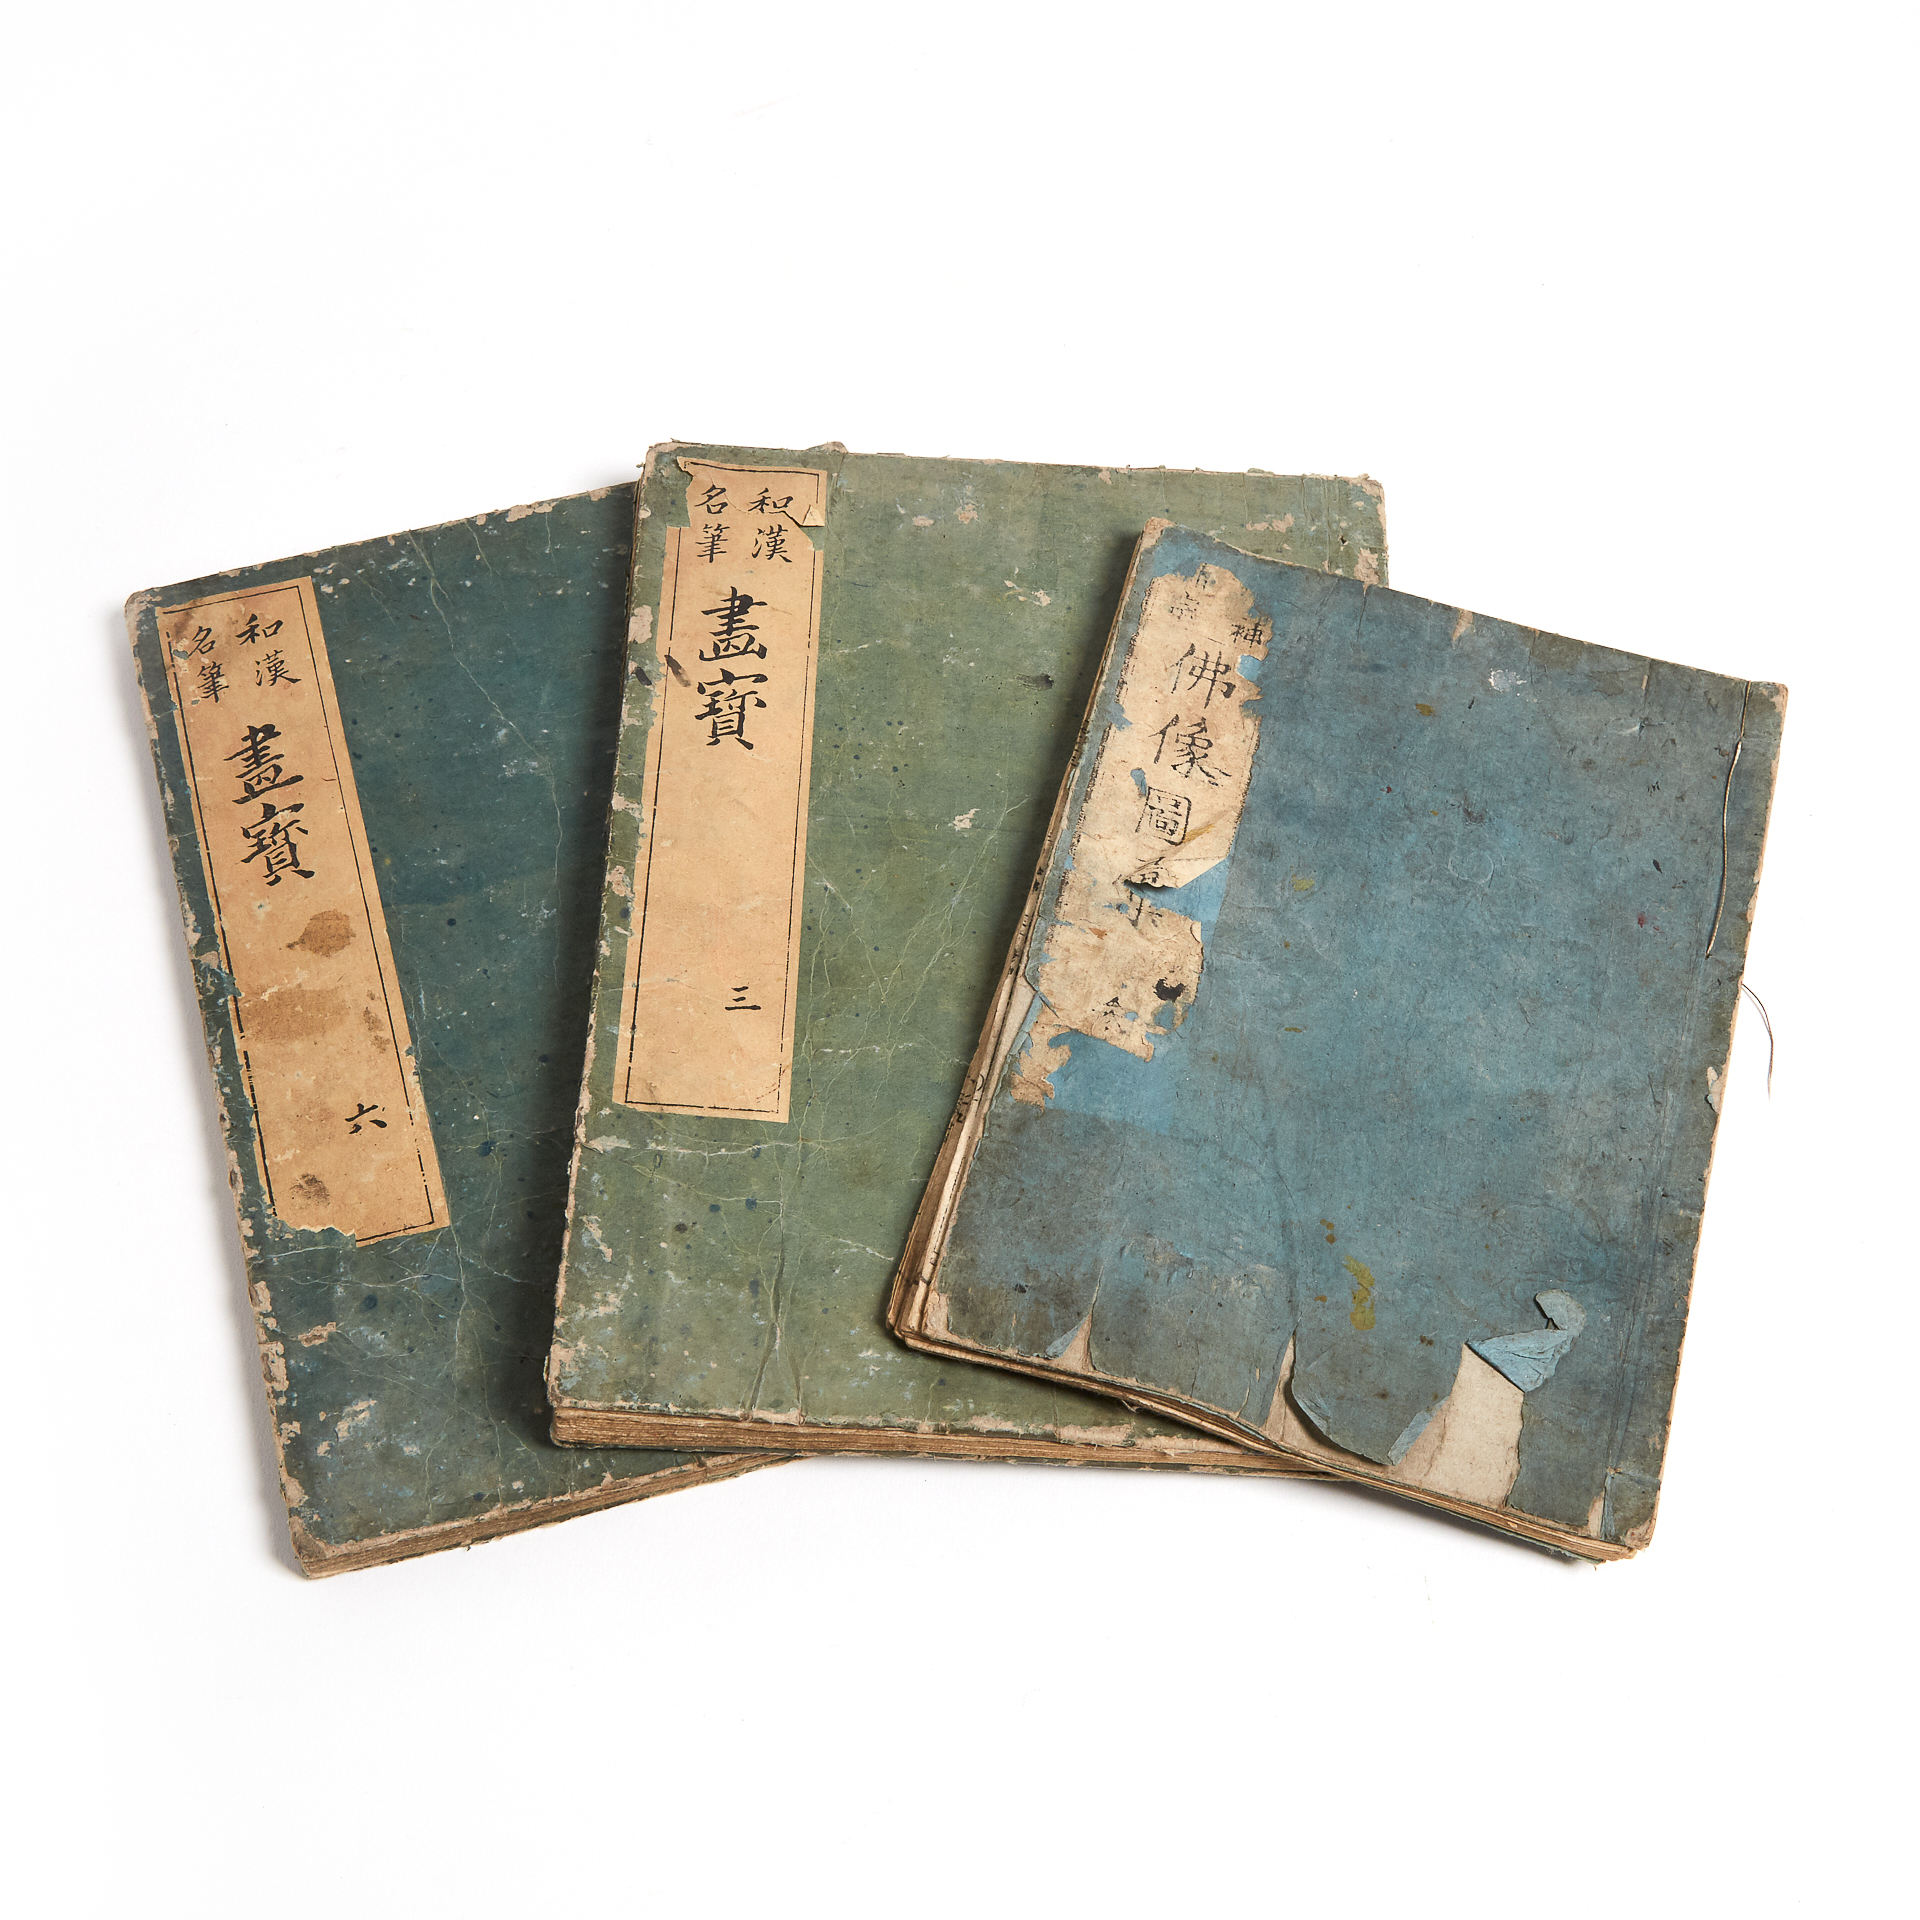 One Volume of Buddhist Figures and Their Attributes, and Volumes Three and Five of Yoshimura Shuzan's Wakan Meihitsu Gaho, 18th Century or Later